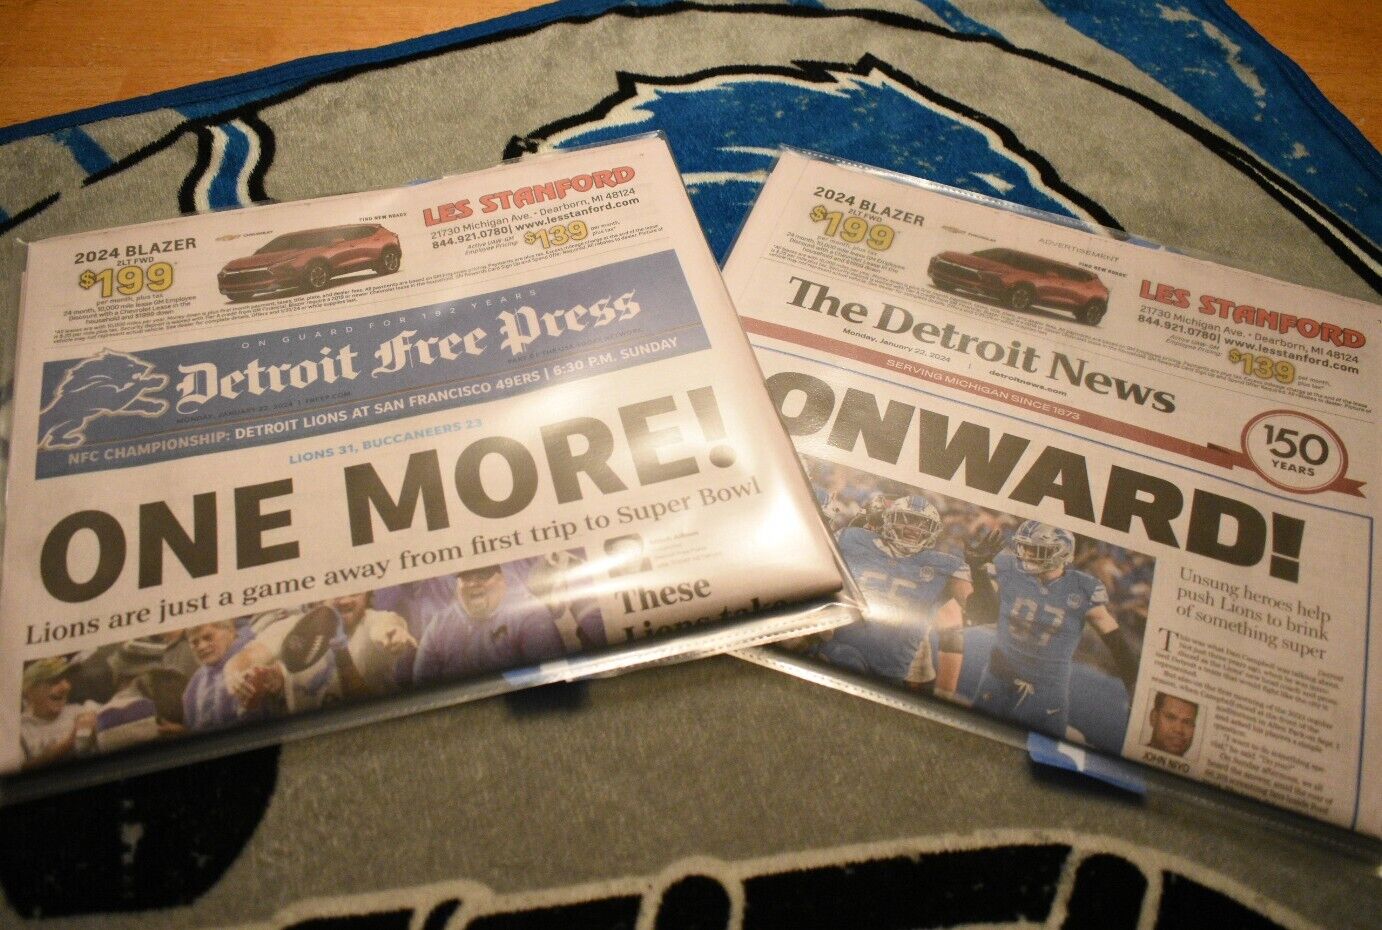 DETROIT LIONS PLAYOFF WIN #2 🦁 ONE MORE & ONWARD BOTH 1/22/24 Newspapers